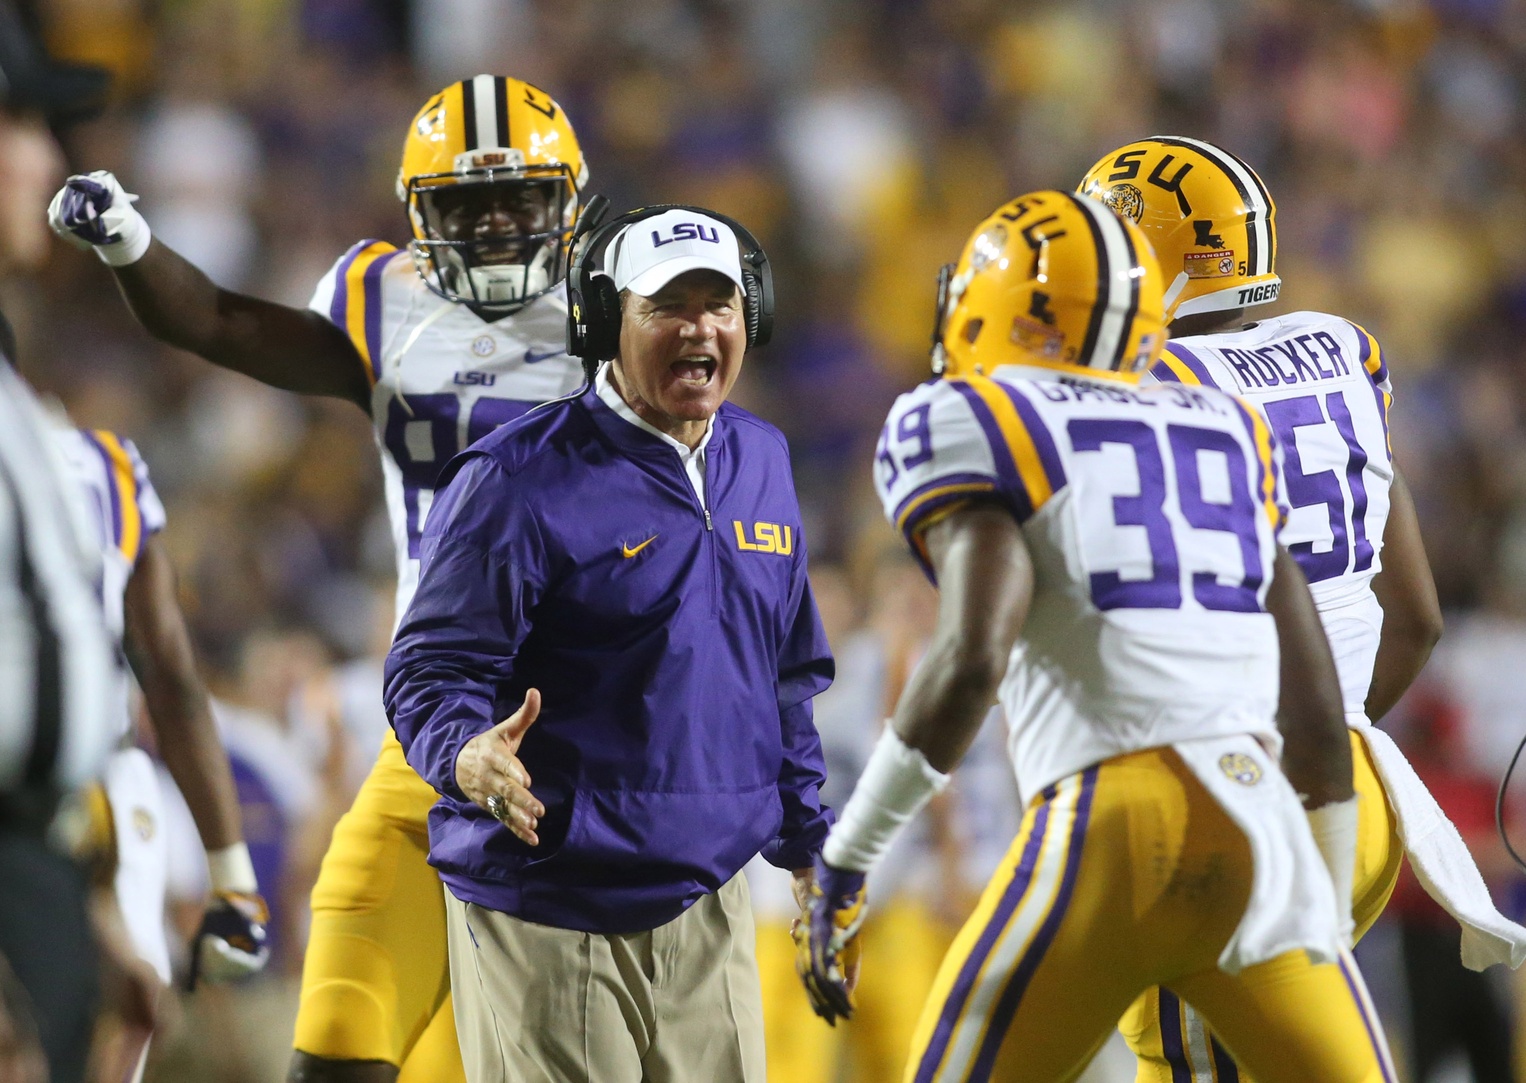 Sep 10, 2016; Baton Rouge, LA, USA; LSU Tigers head coach Les Miles congratulates Russell Gage (39) after a tackle against the Jacksonville State Gamecocks during the second half at Tiger Stadium. LSU defeated Jacksonville State 34-13. Mandatory Credit: Crystal LoGiudice-USA TODAY Sports